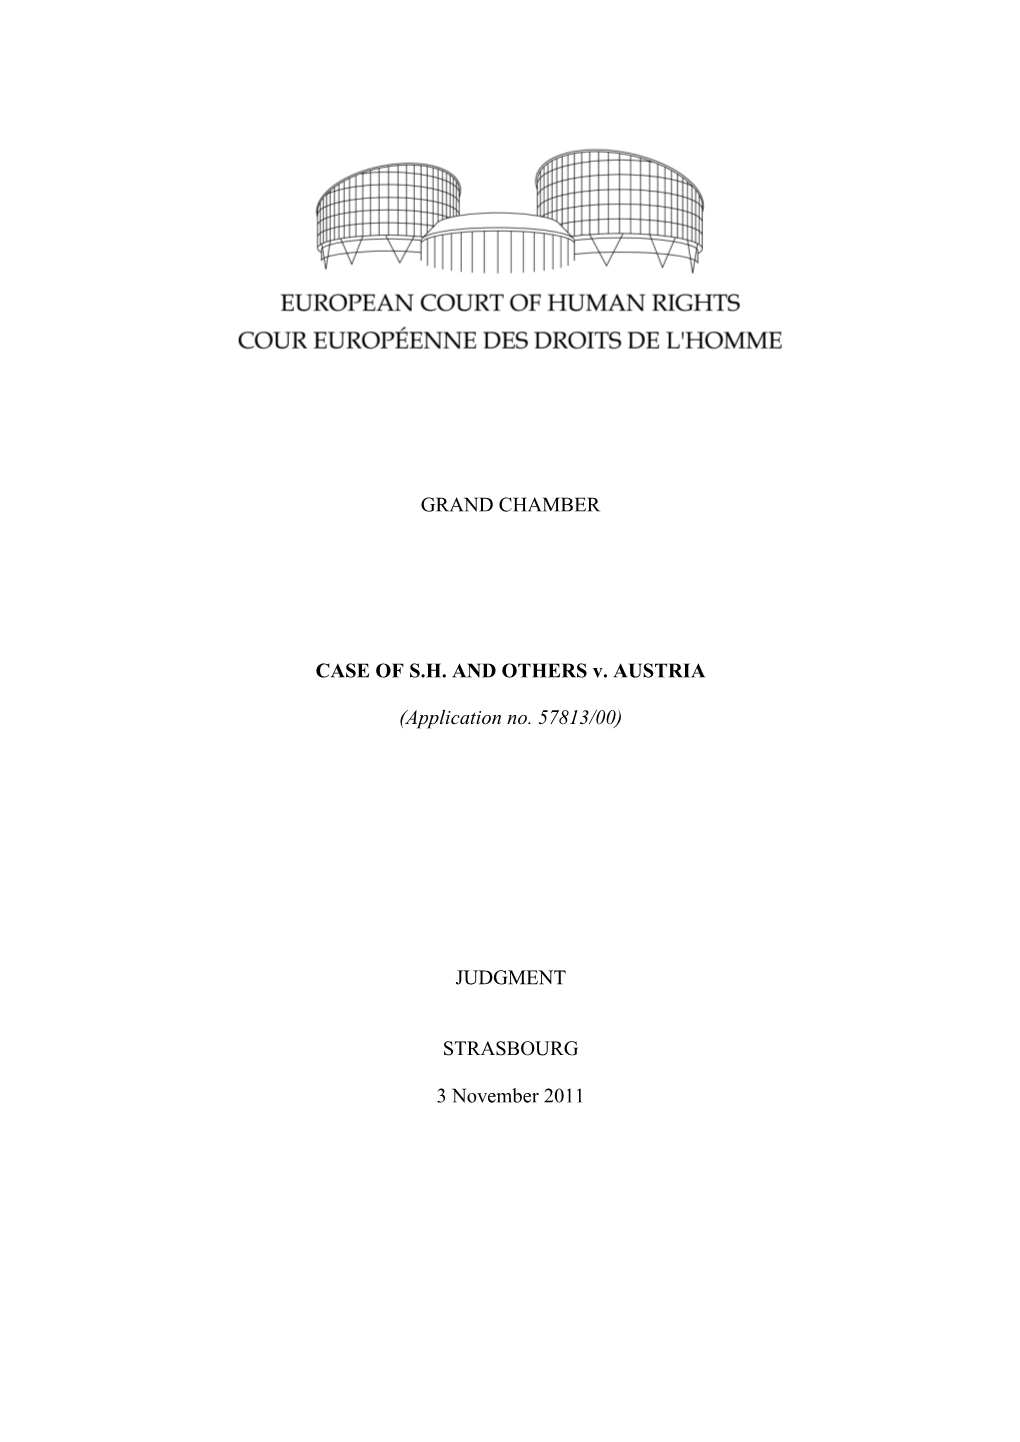 GRAND CHAMBER CASE of S.H. and OTHERS V. AUSTRIA